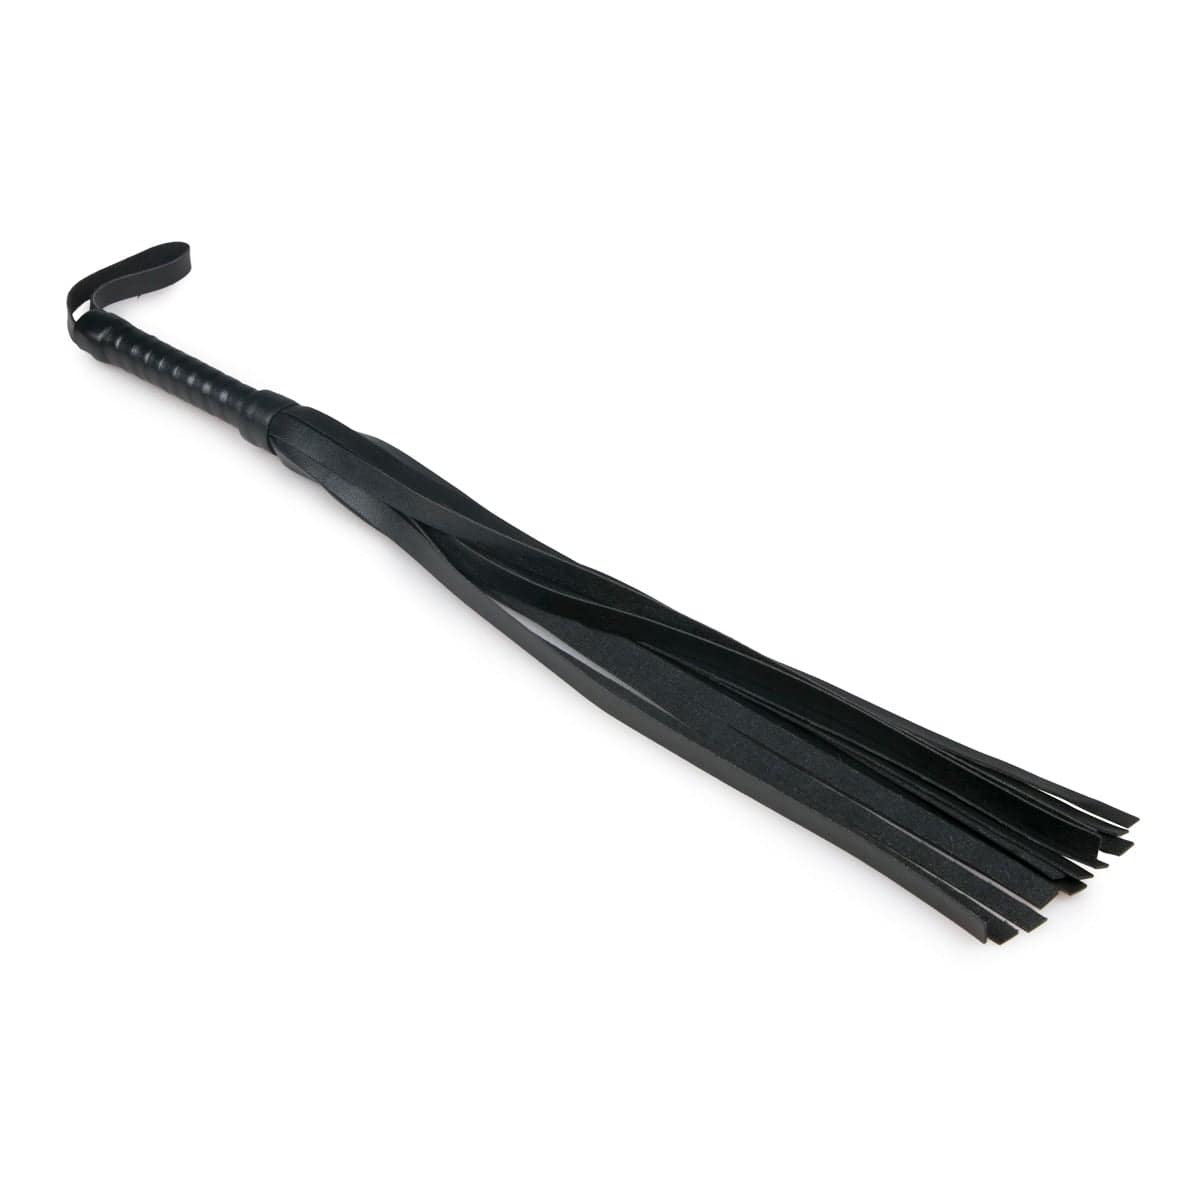 Fetish Collection Adult Toys Black Flogger Whip Leather 8718627528419